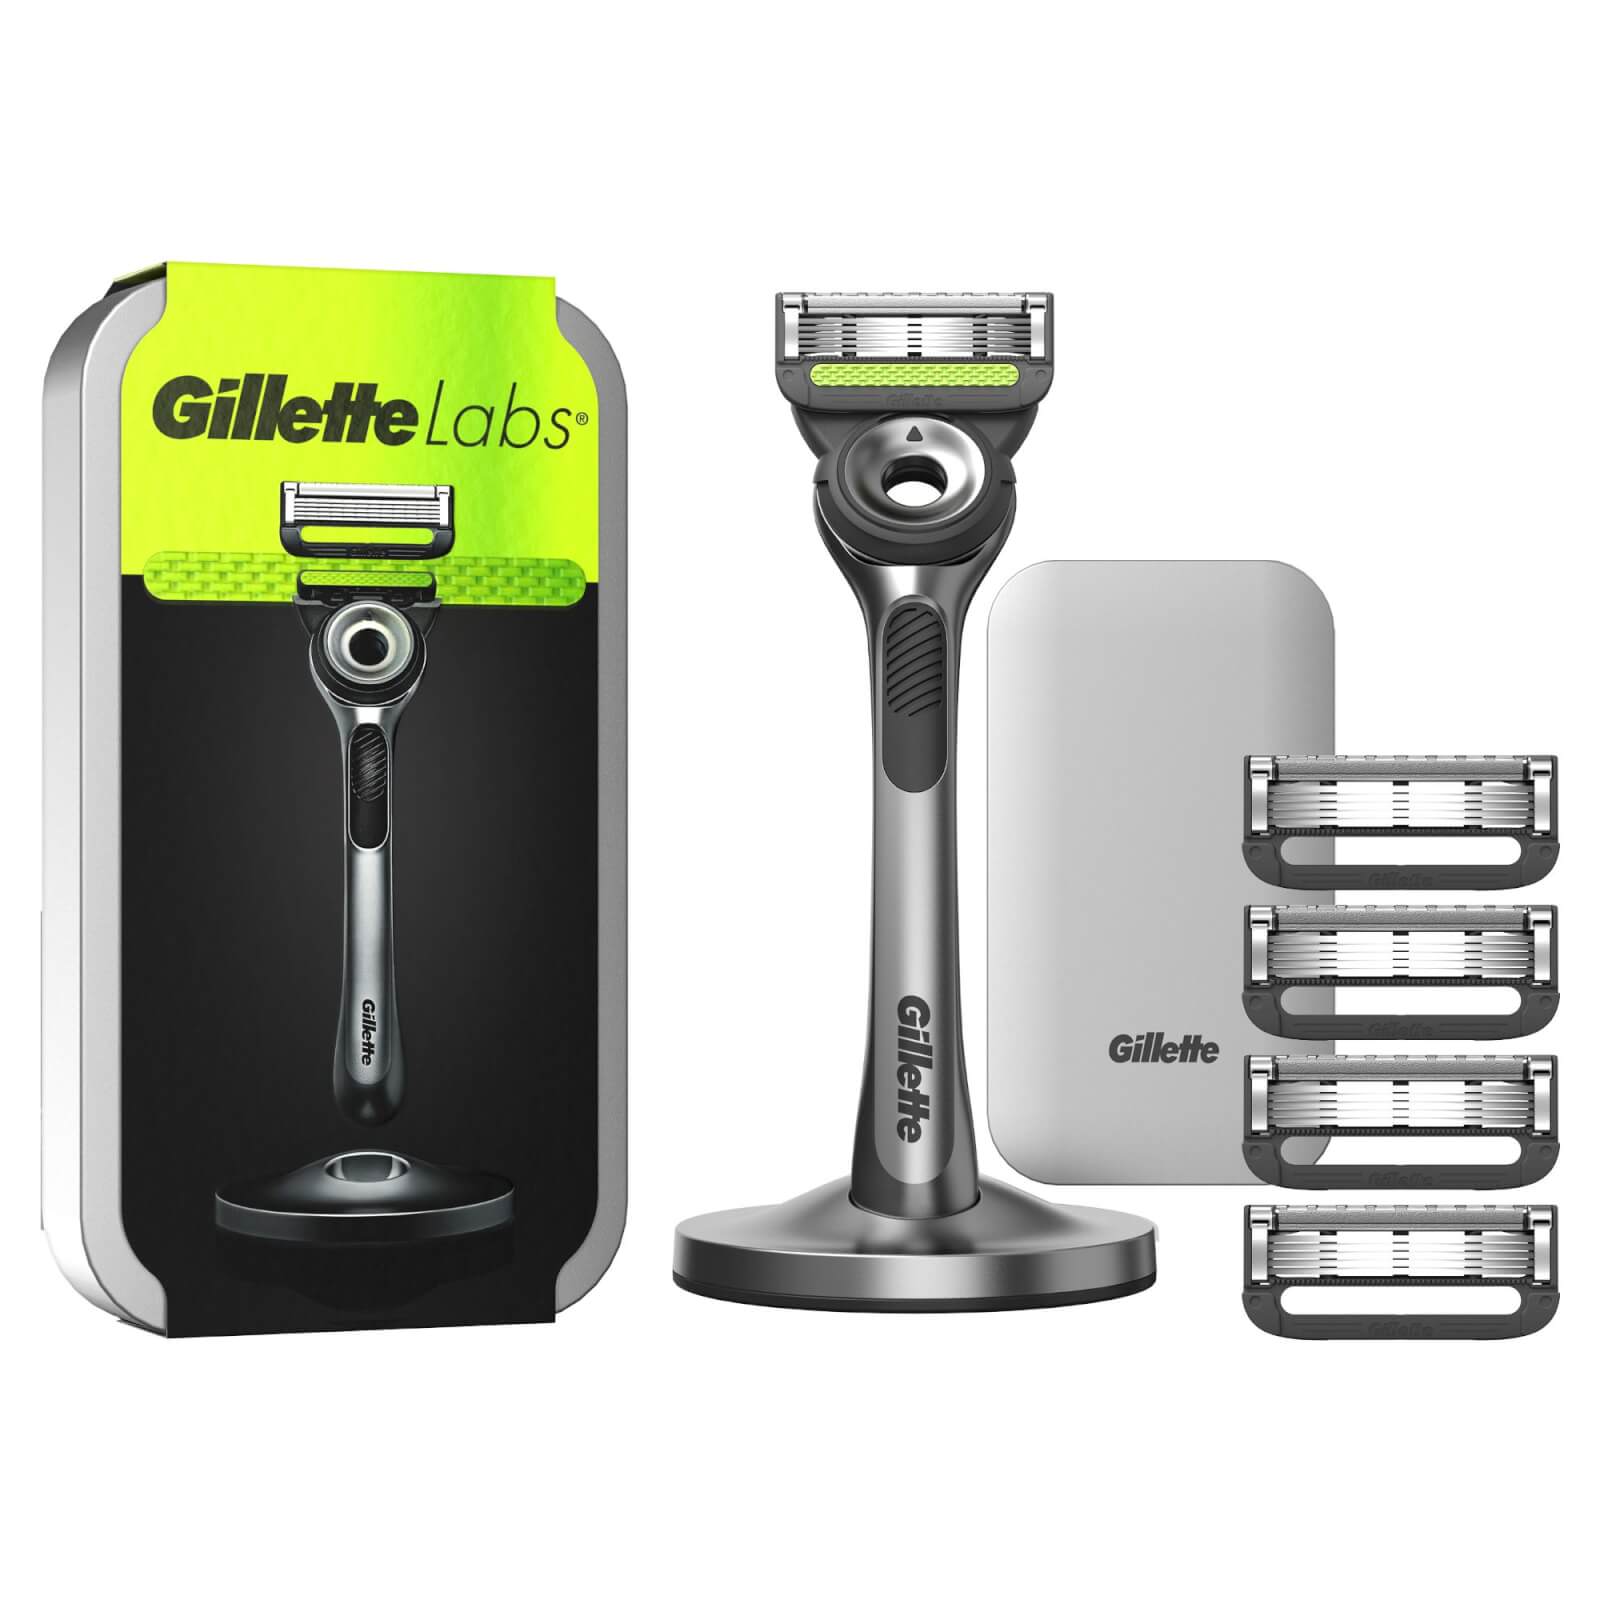 Gillette Labs Razor  Travel Case and 4 Blade Refills - Silver